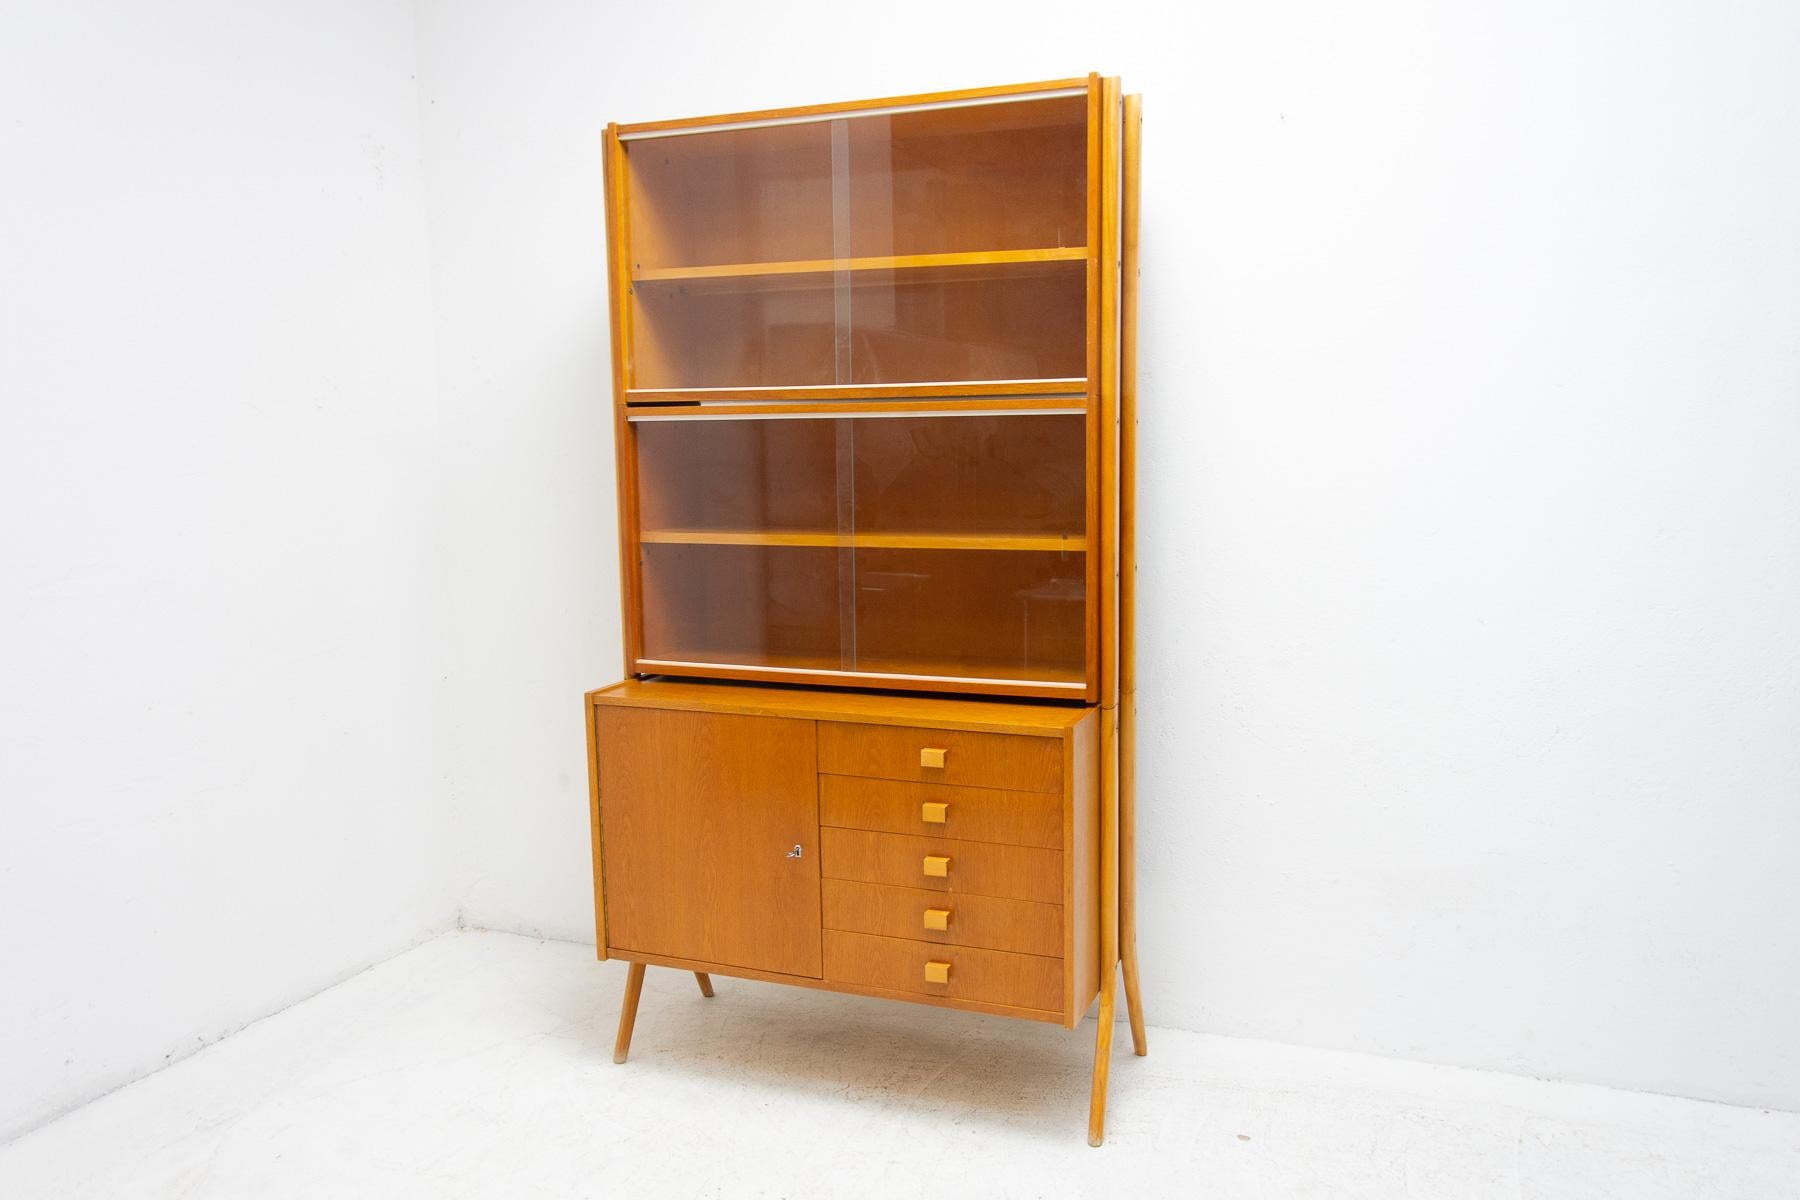 Mid century vintage bookcase from the 1960´s. It was designed by František Jirák and was manufactured by Tatra nábytok company in the former Czechoslovakia. Features a simple design. In very good condition. Beech wood veneer.
 